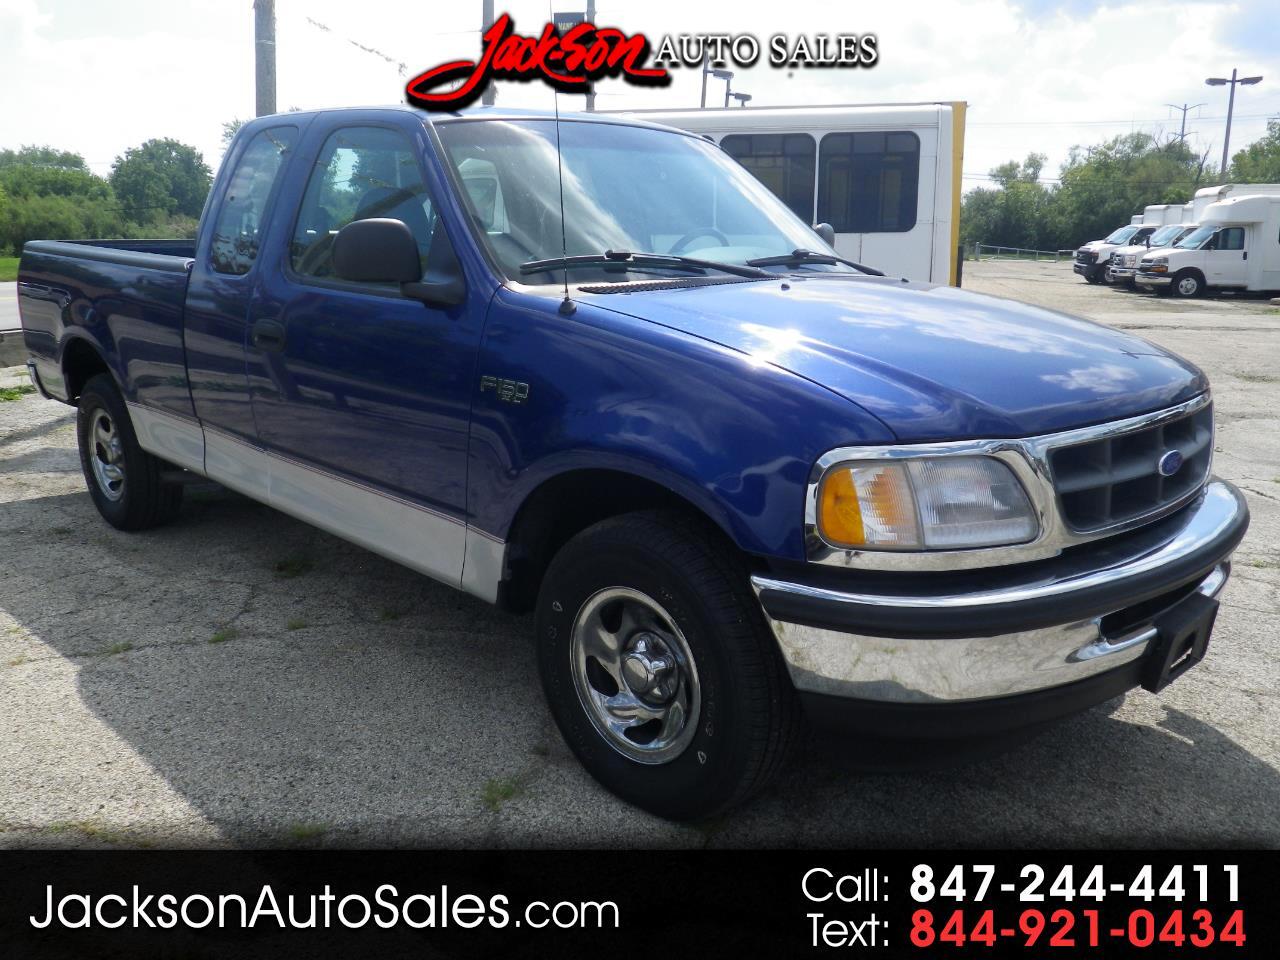 1997 Ford F-150 Supercab 139"